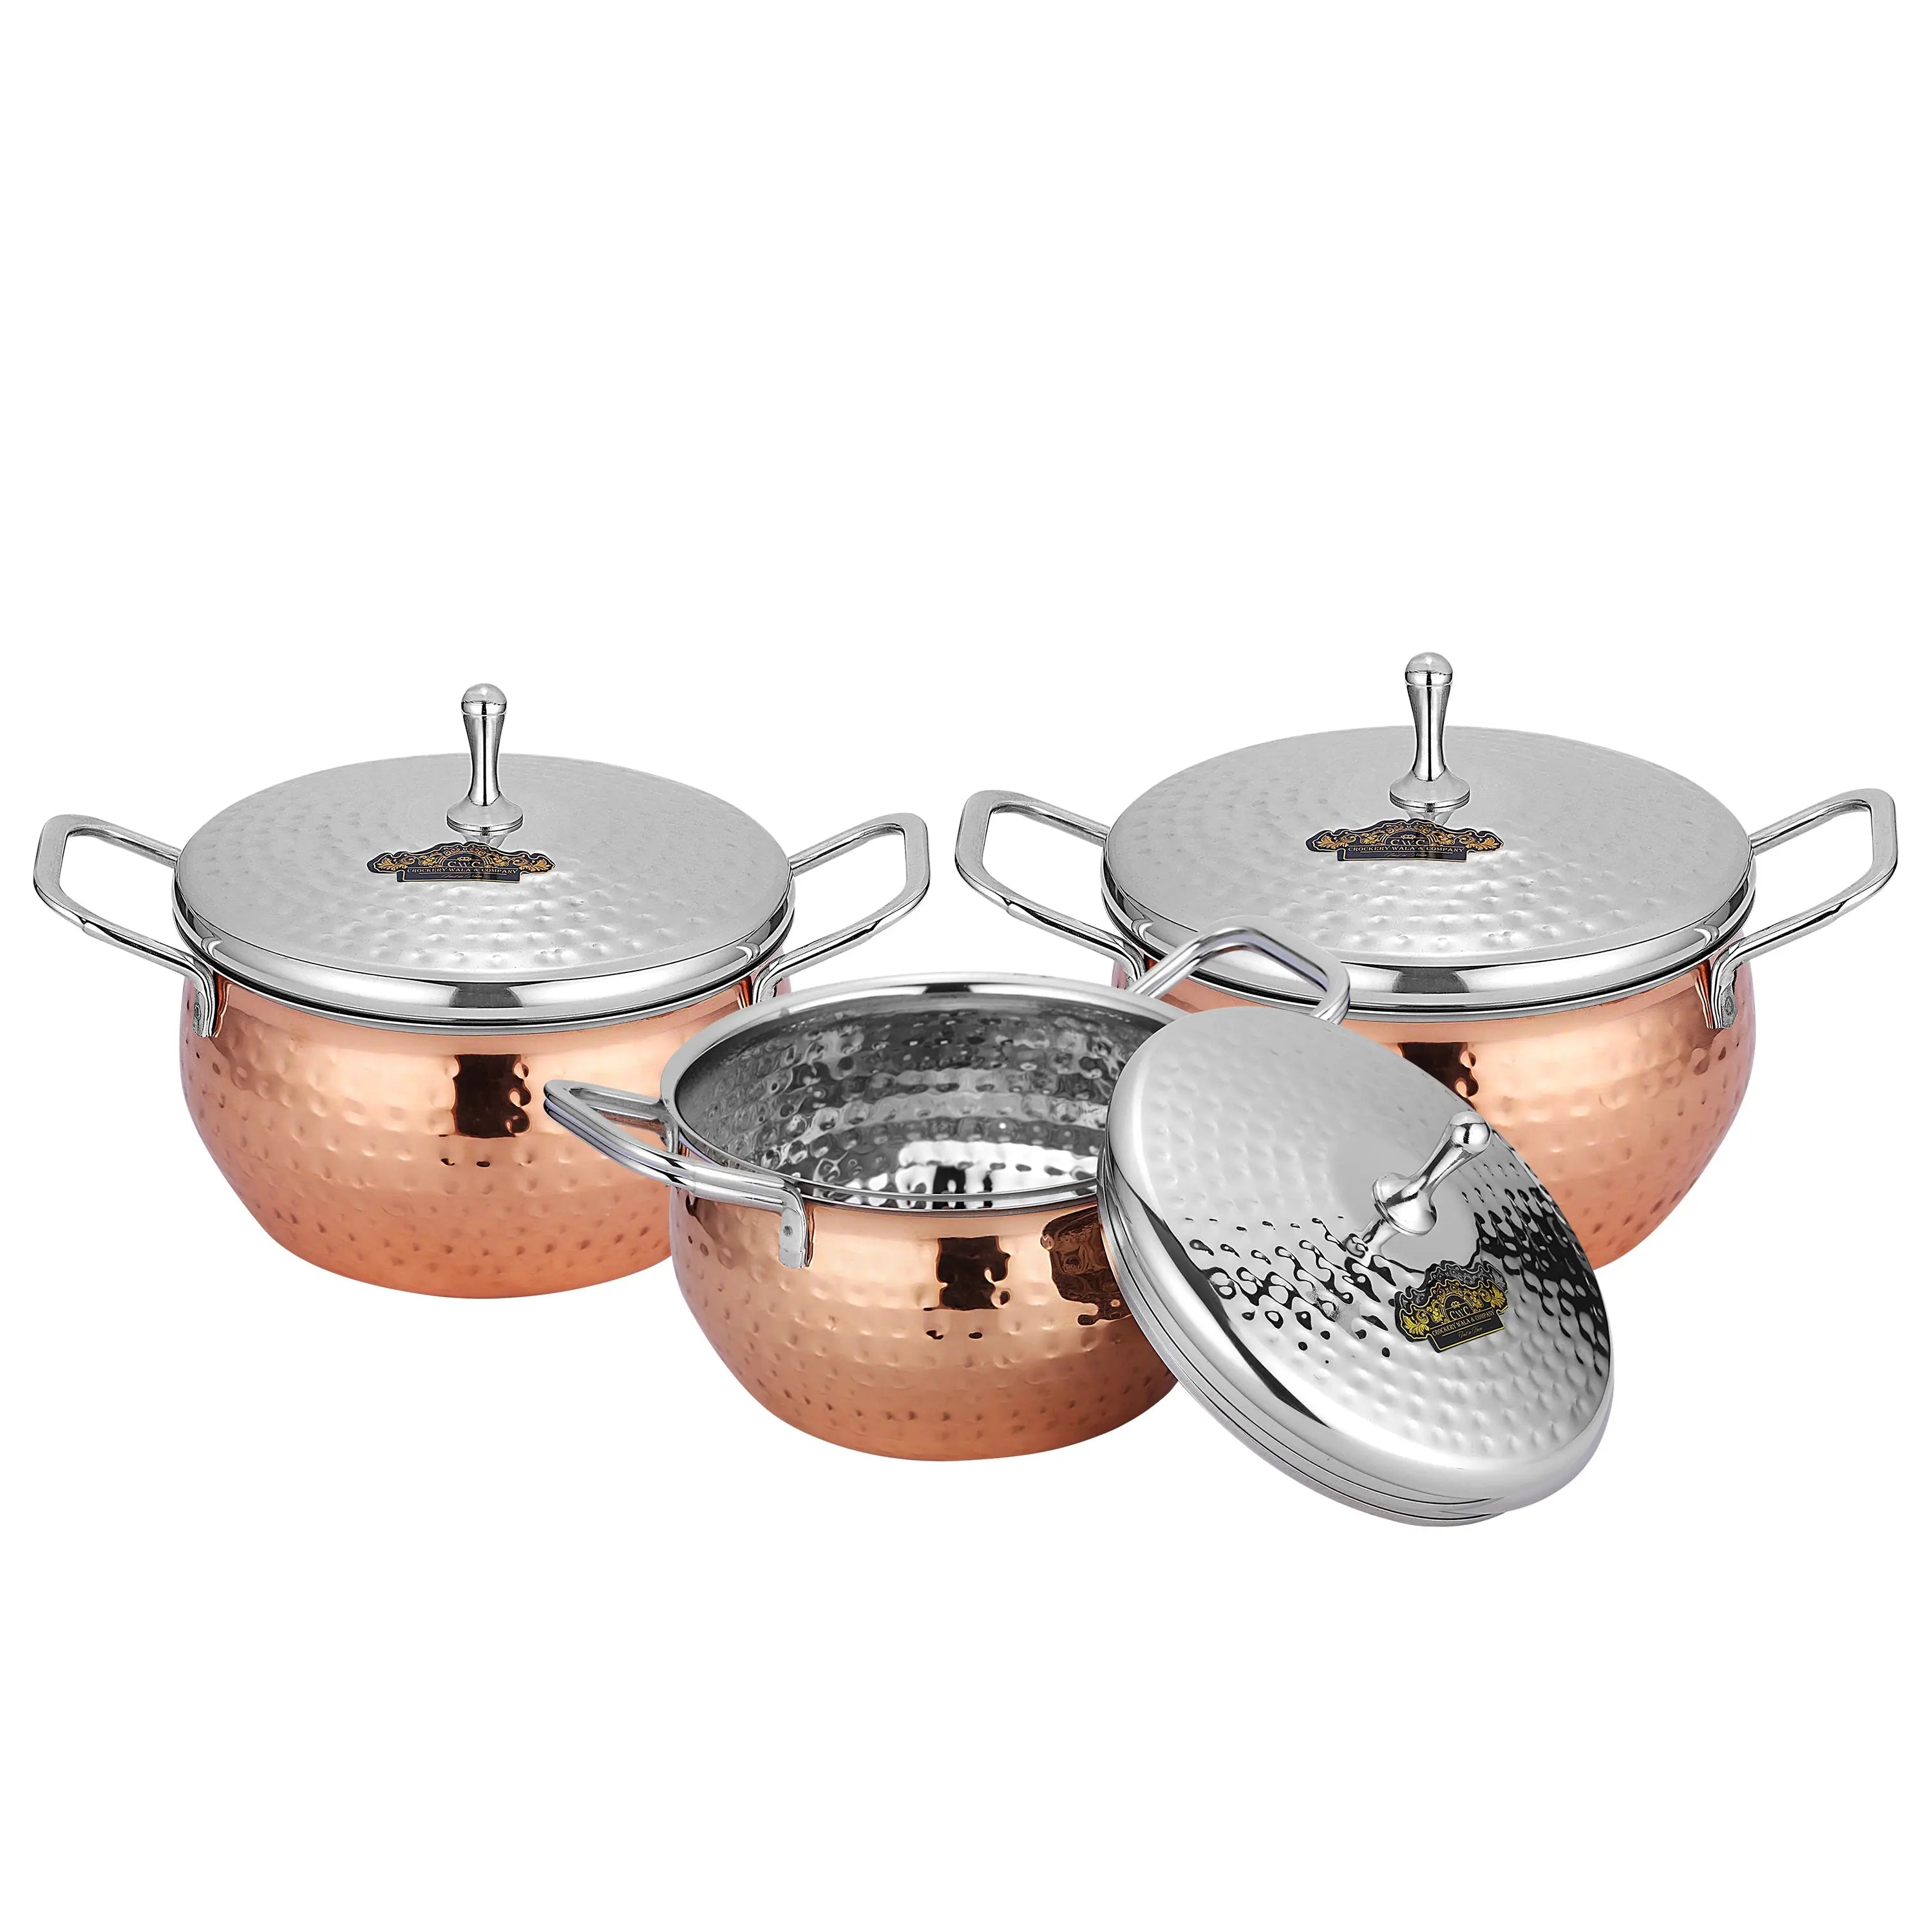 STAINLESS STEEL COPPER PVD PINACLE HANDI SET-3 PCS - CROCKERY WALA AND COMPANY 